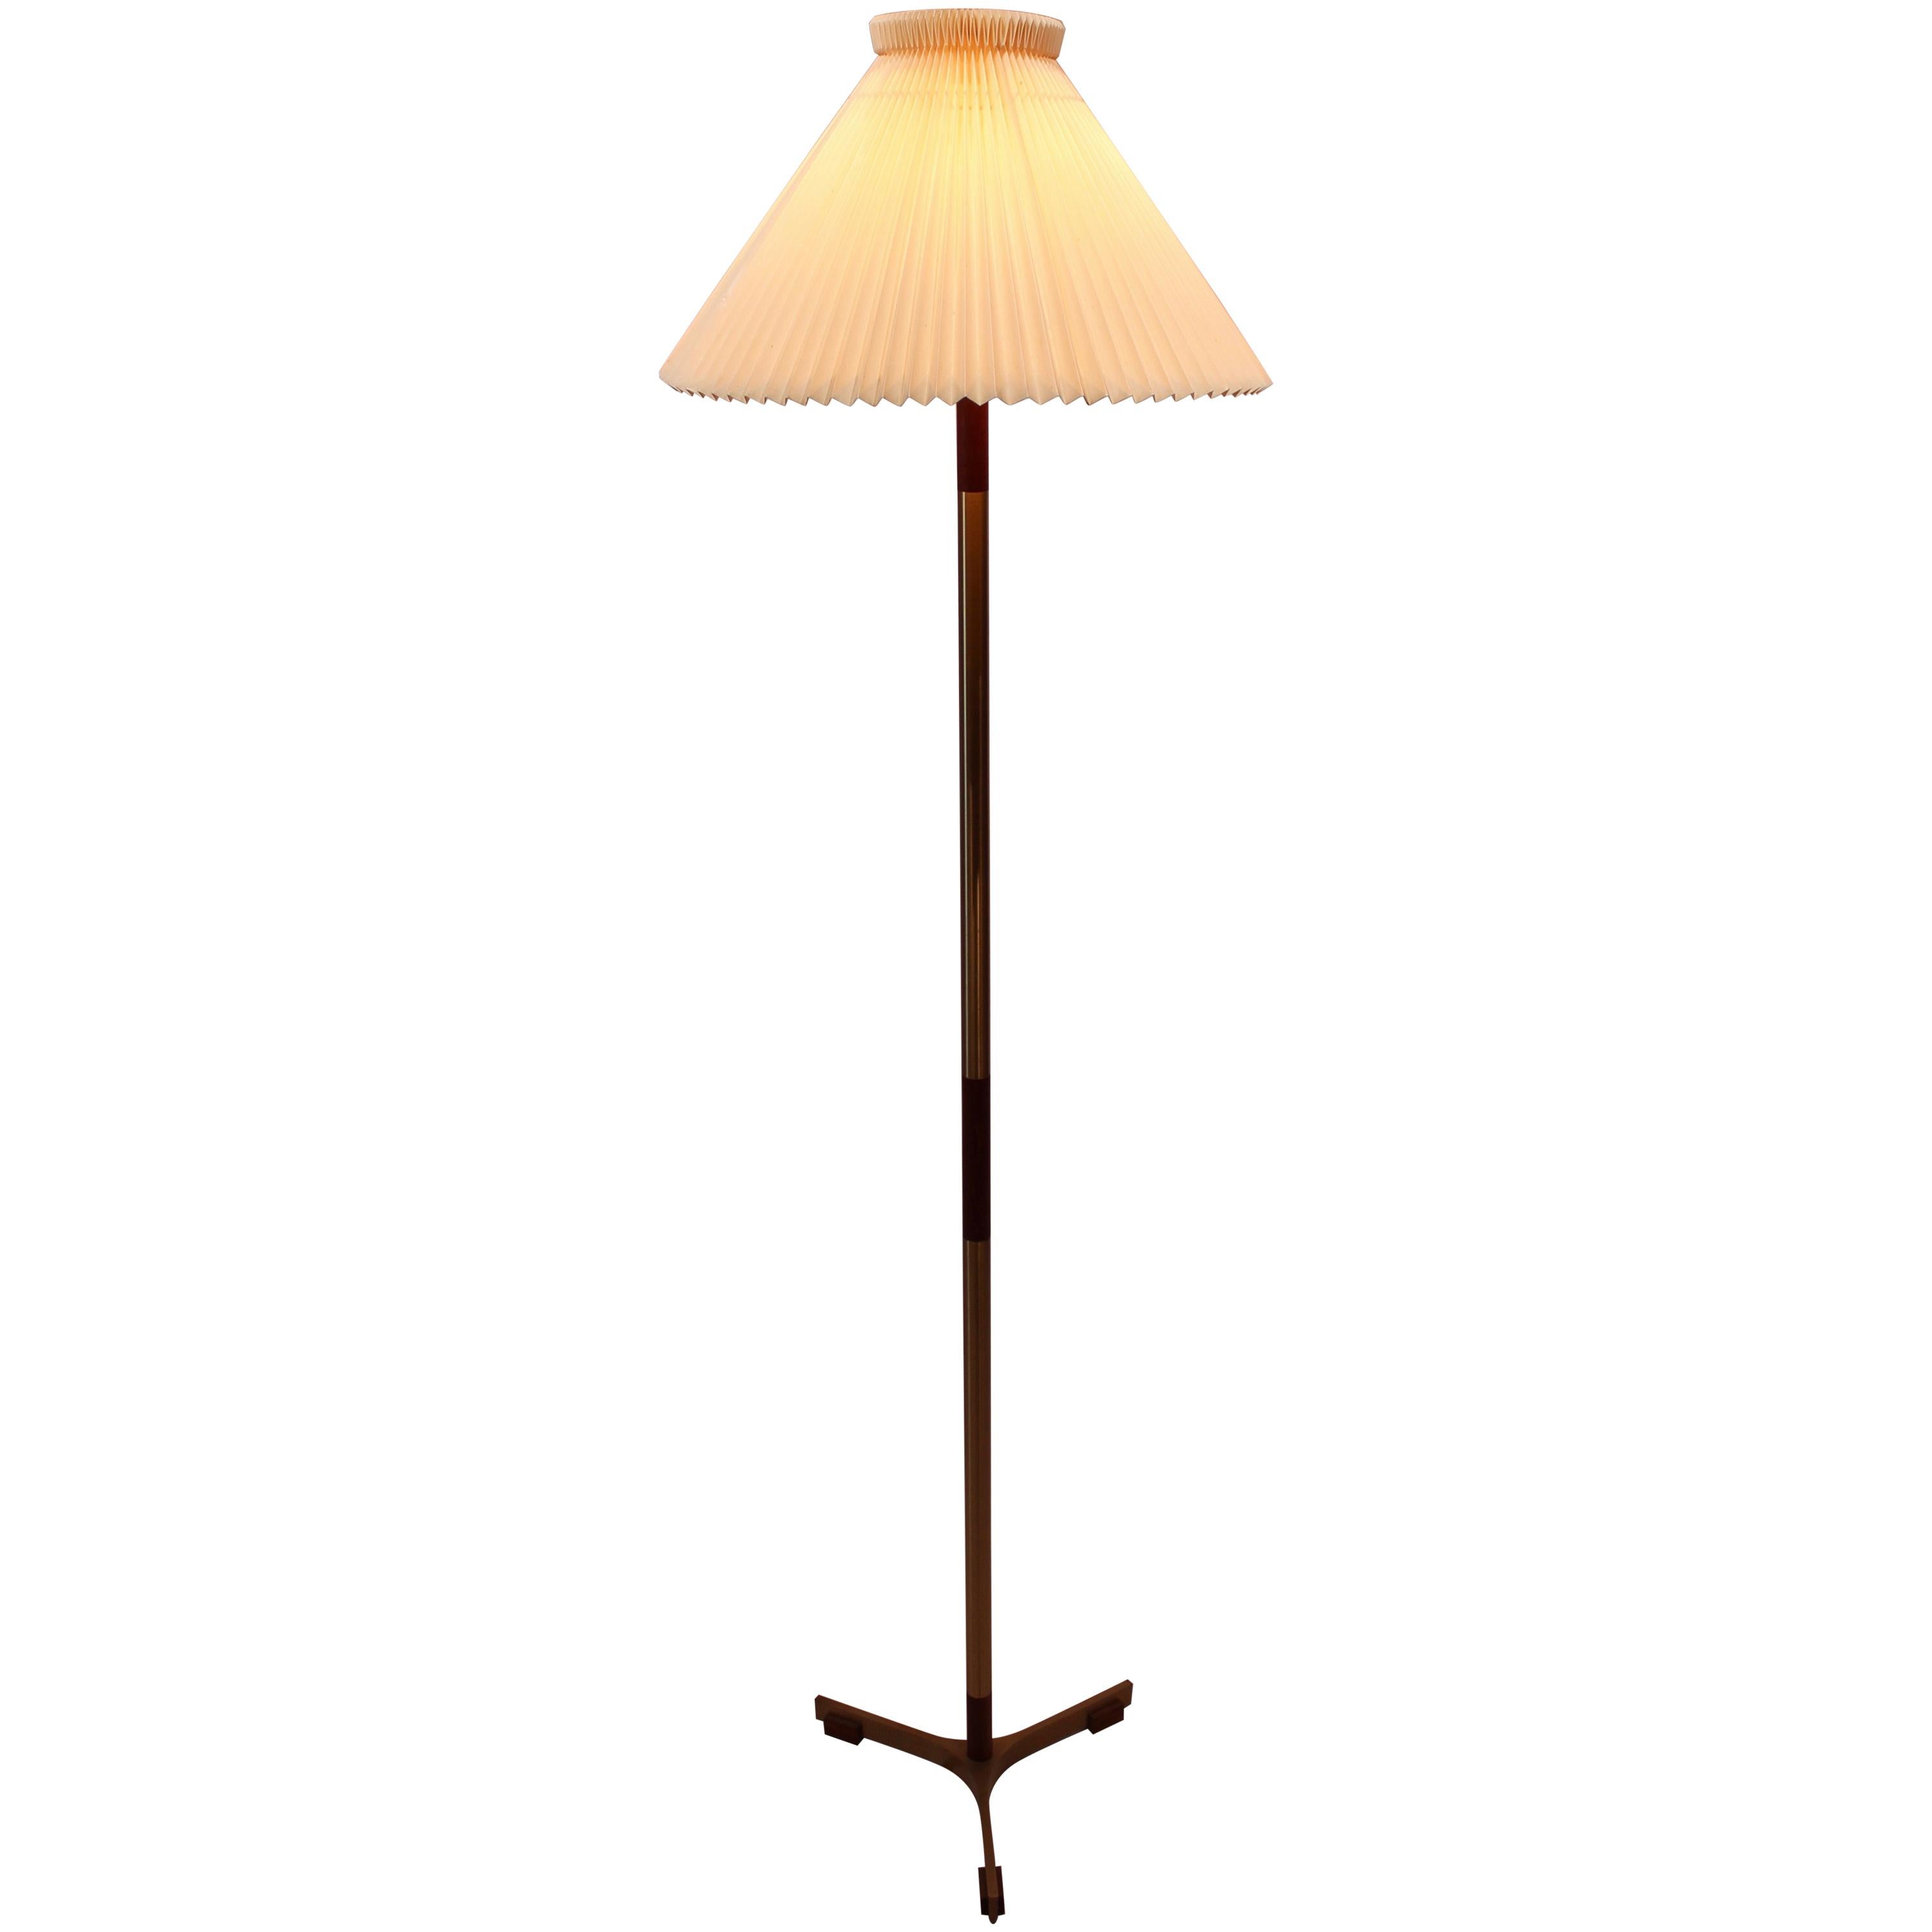 Tall Floor Lamp of Teak and Brass, of Danish Design from the 1960s